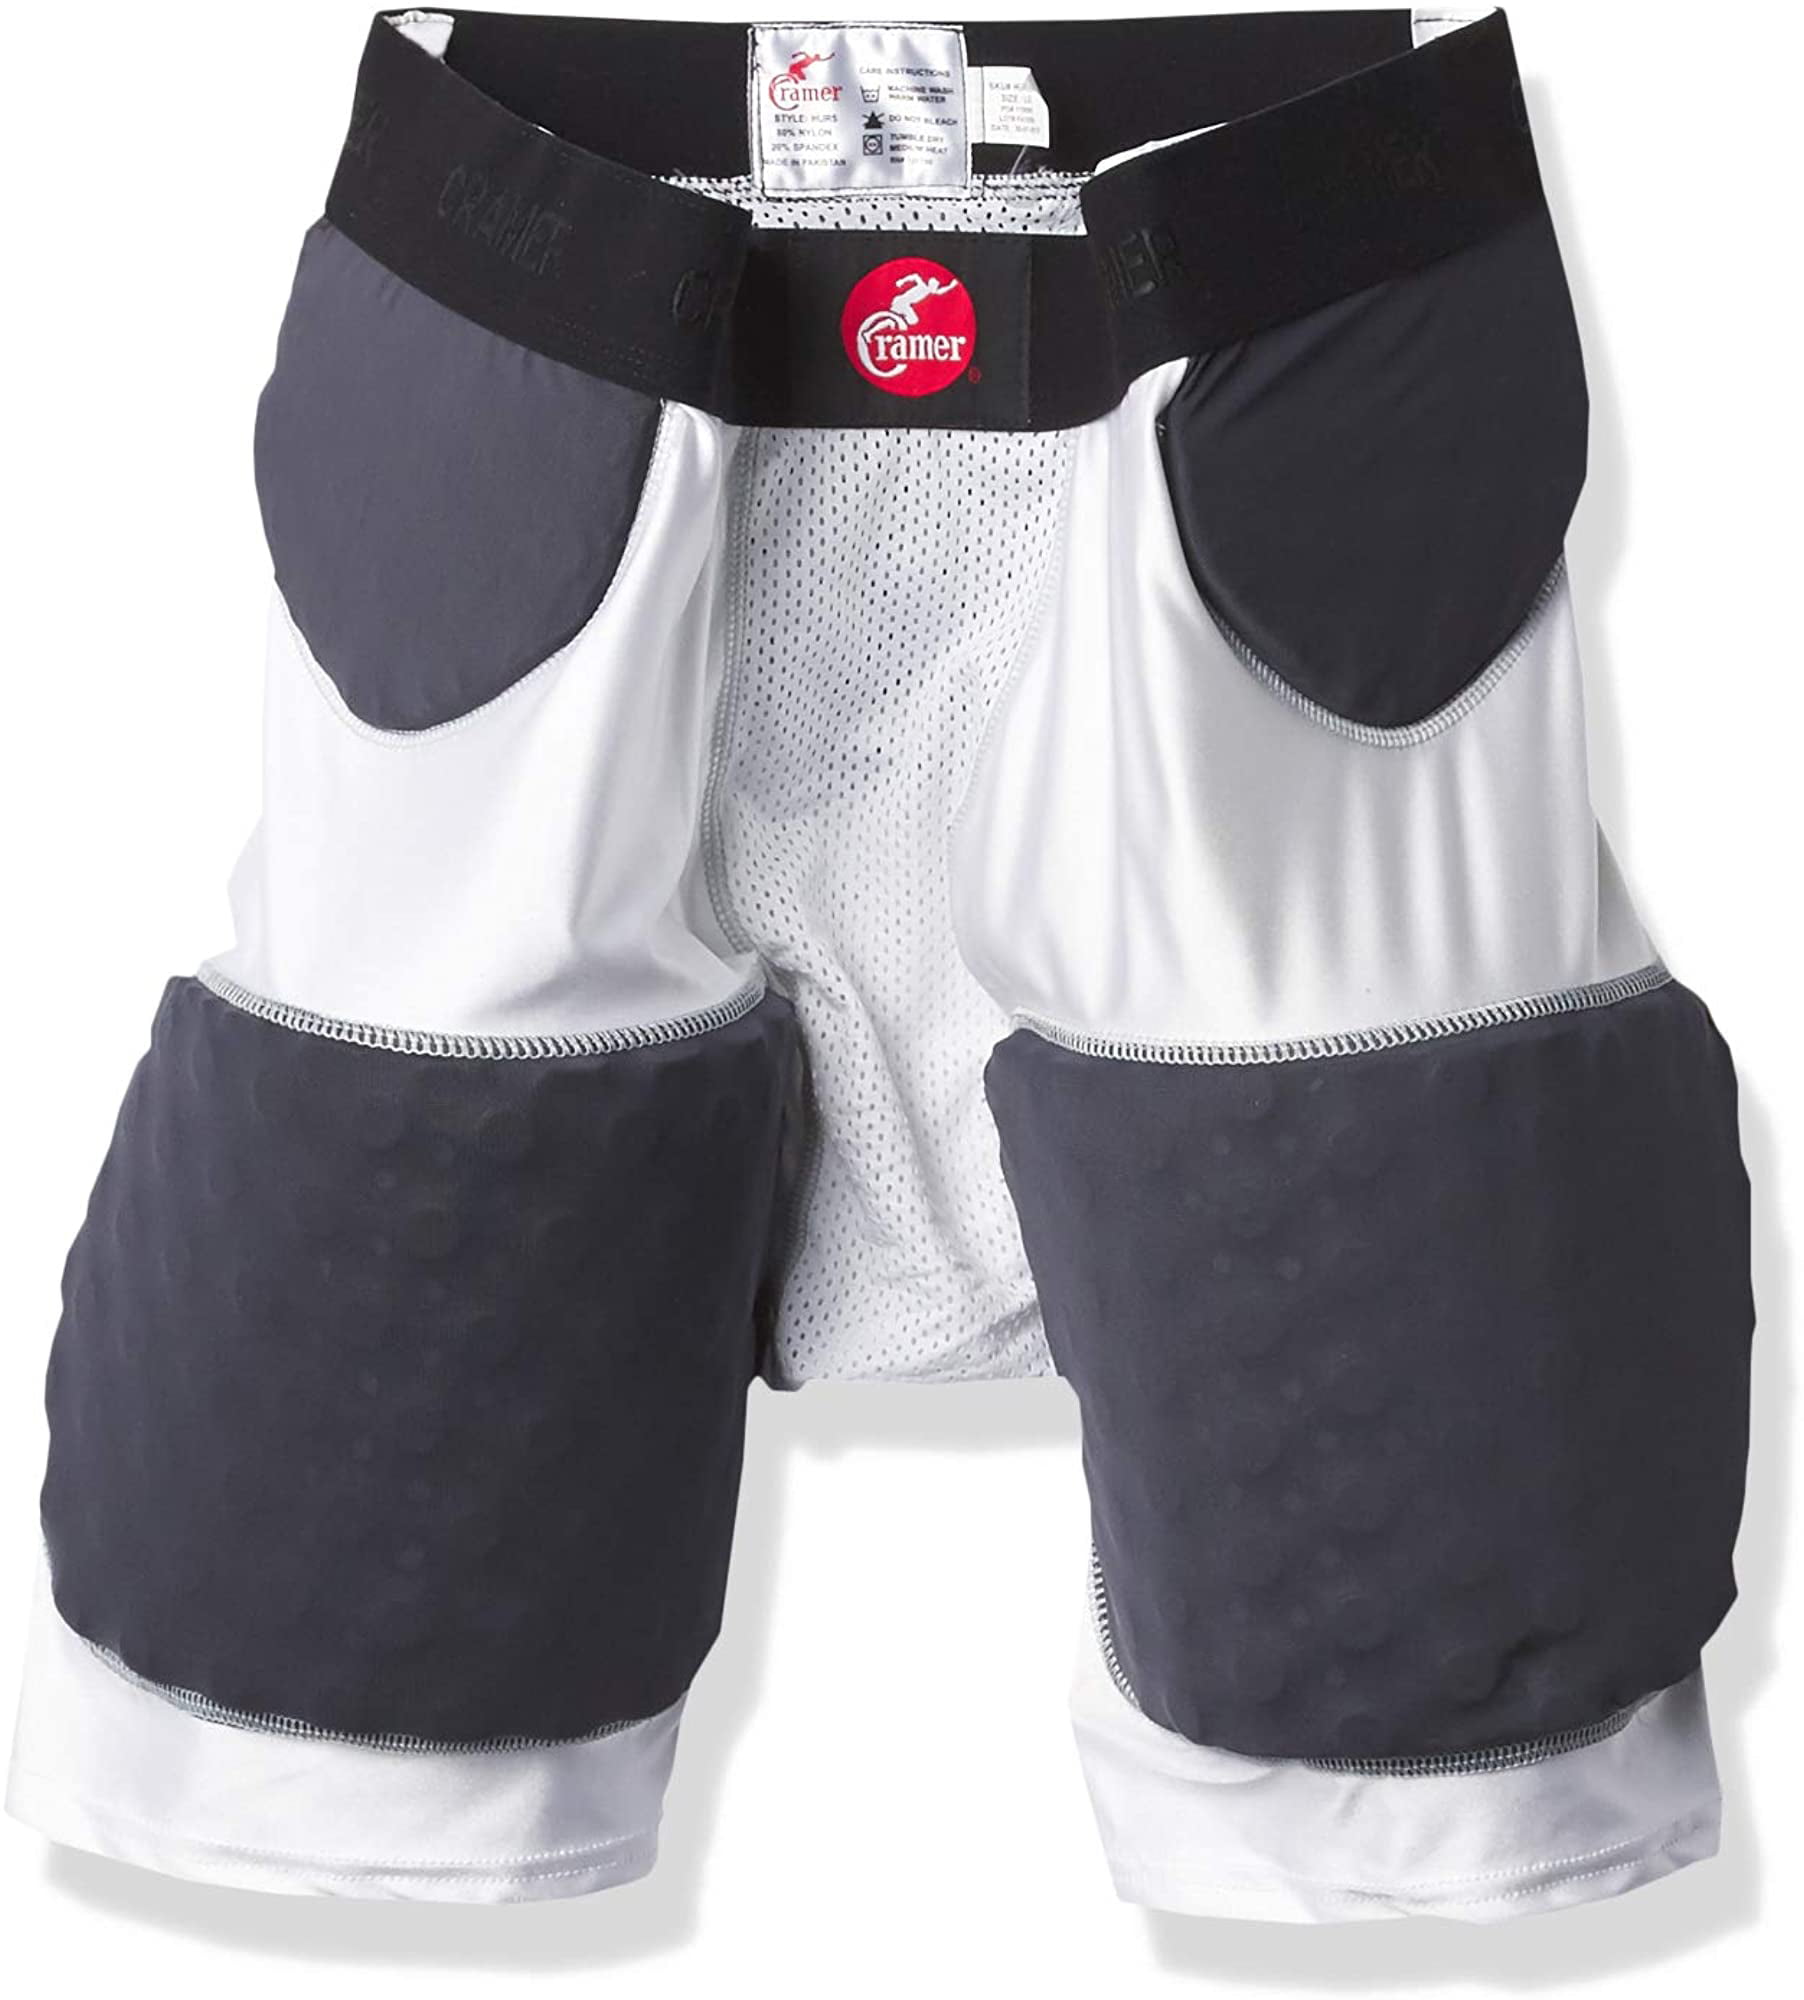 Foam Padding for Extra Protection Hip and Tailbone Pads Football Pant with Thigh Breathable Fabric Football Protection Gear Cramer Hurricane 5 Pad Football Girdle Football Gear